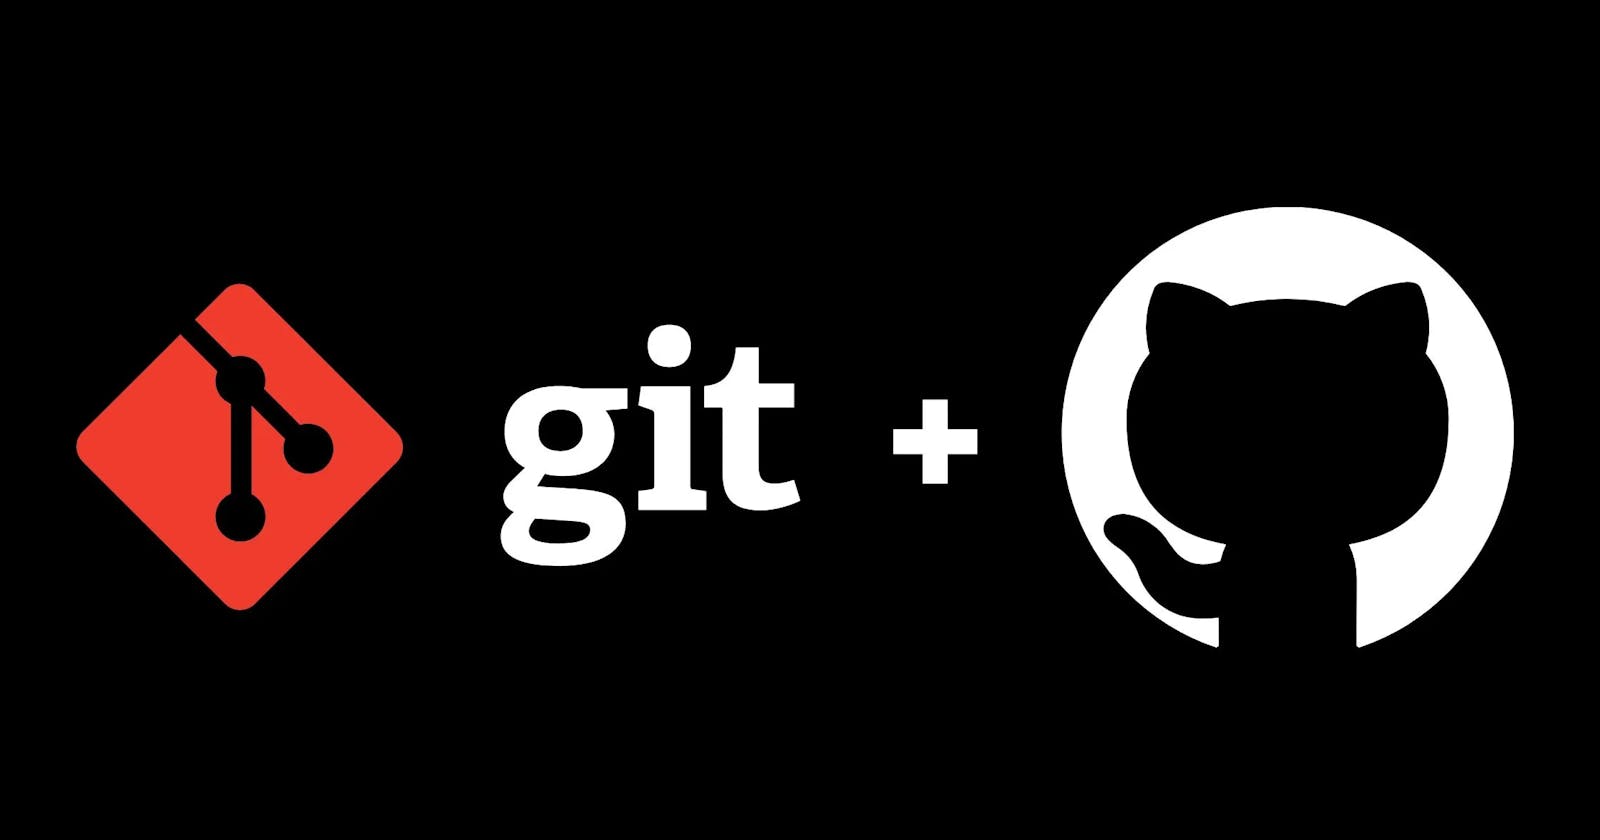 Essential Git Commands Every Developer Should Know